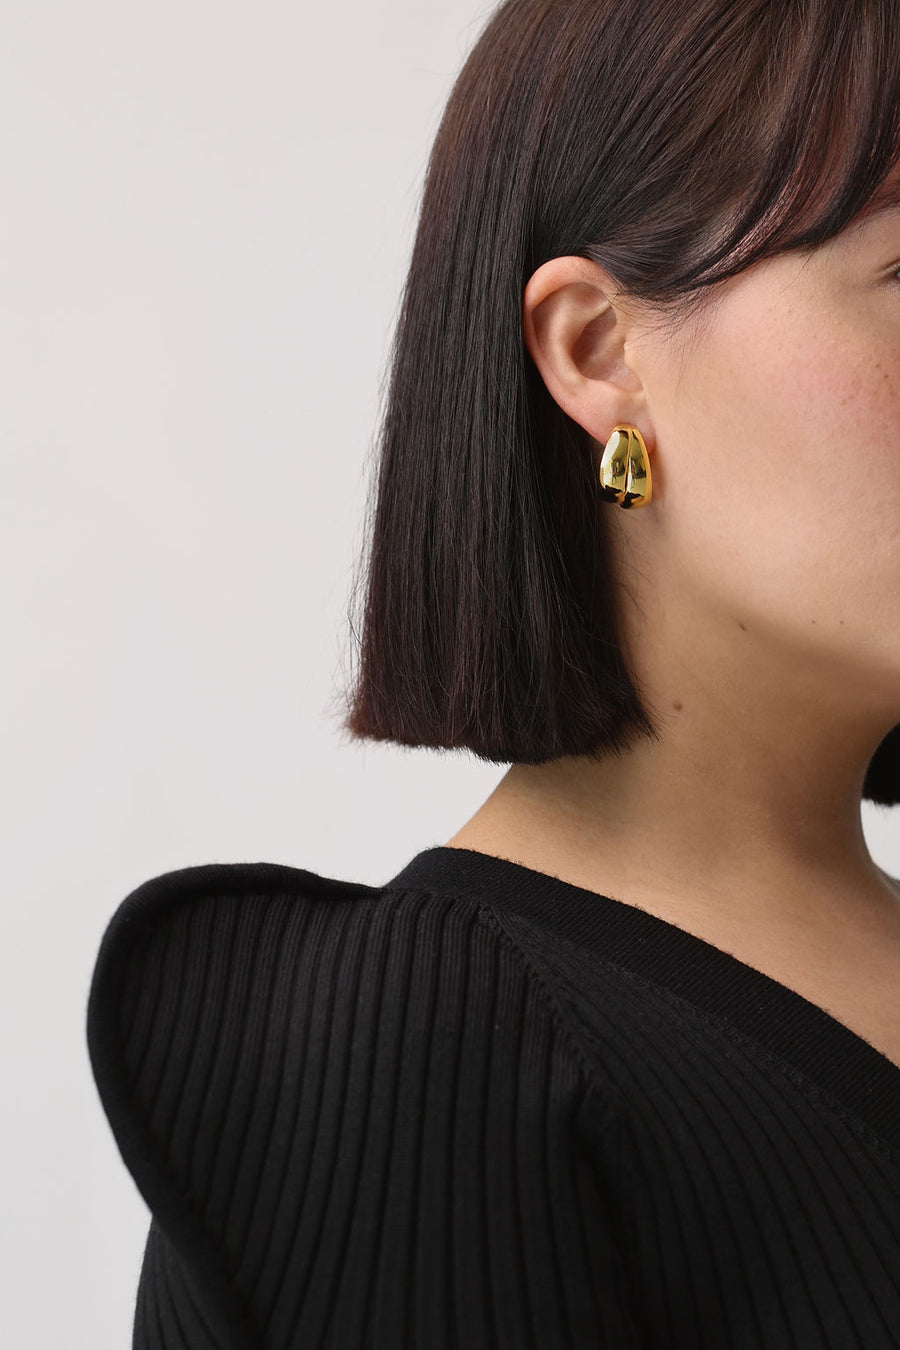 Close up of gold earring on woman's ear. She has bob length brown hair and is wearing a black knit 